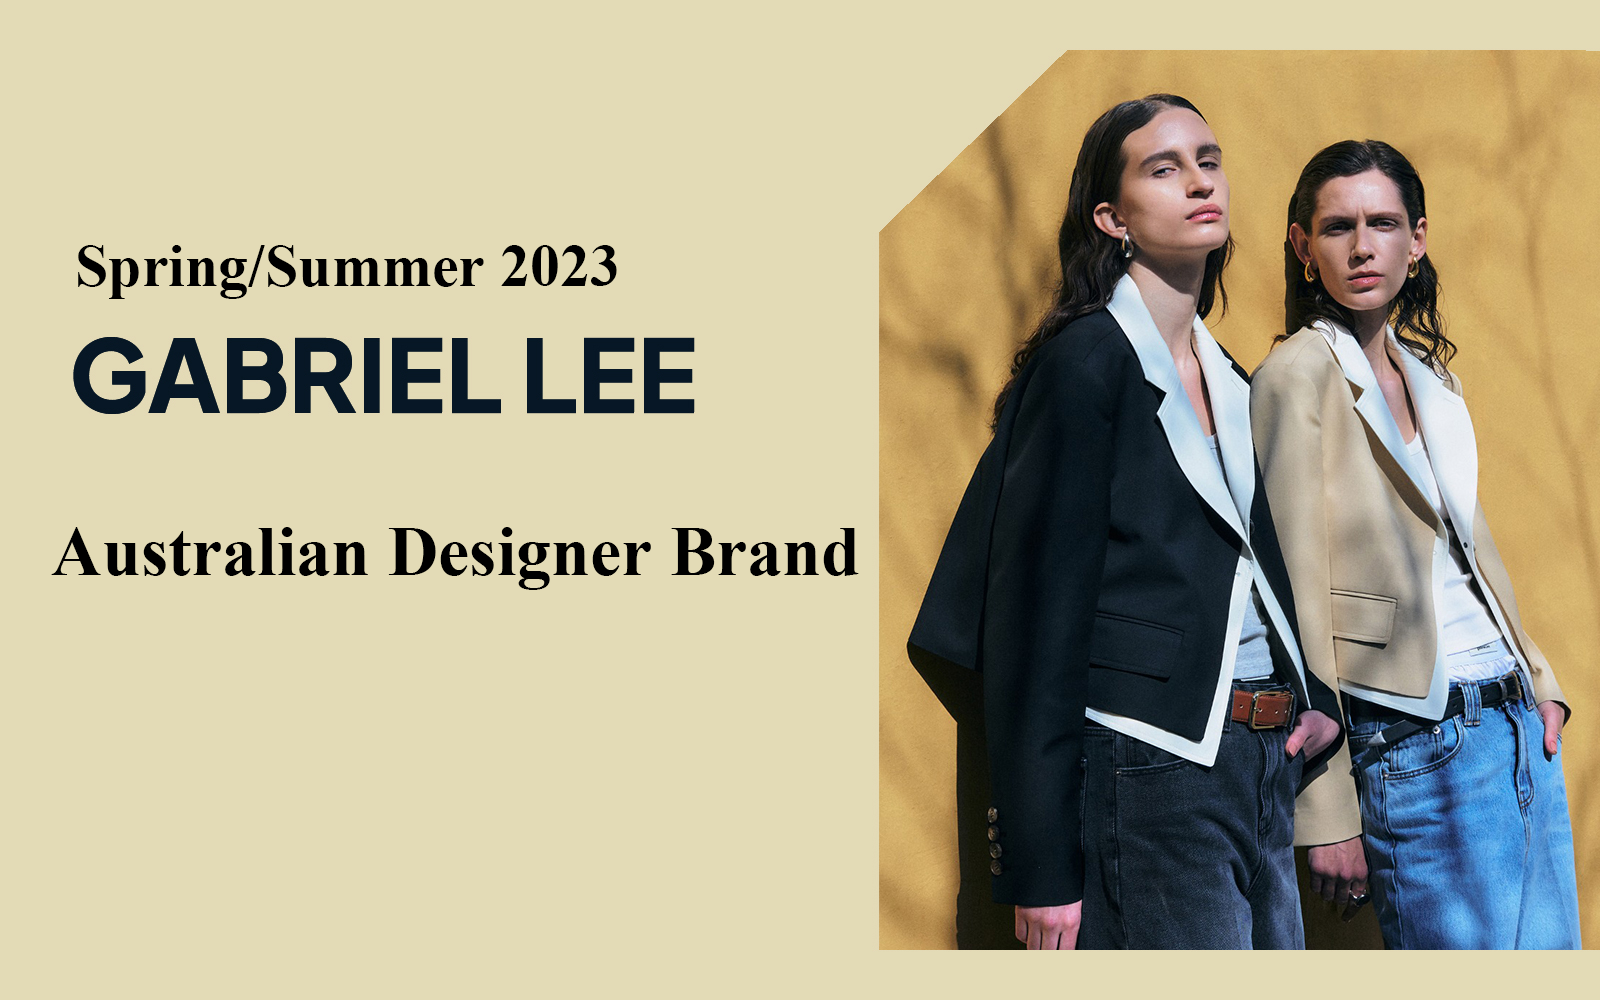 Cleanfit -- The Analysis of Gabriel Lee The Womenswear Designer Brand